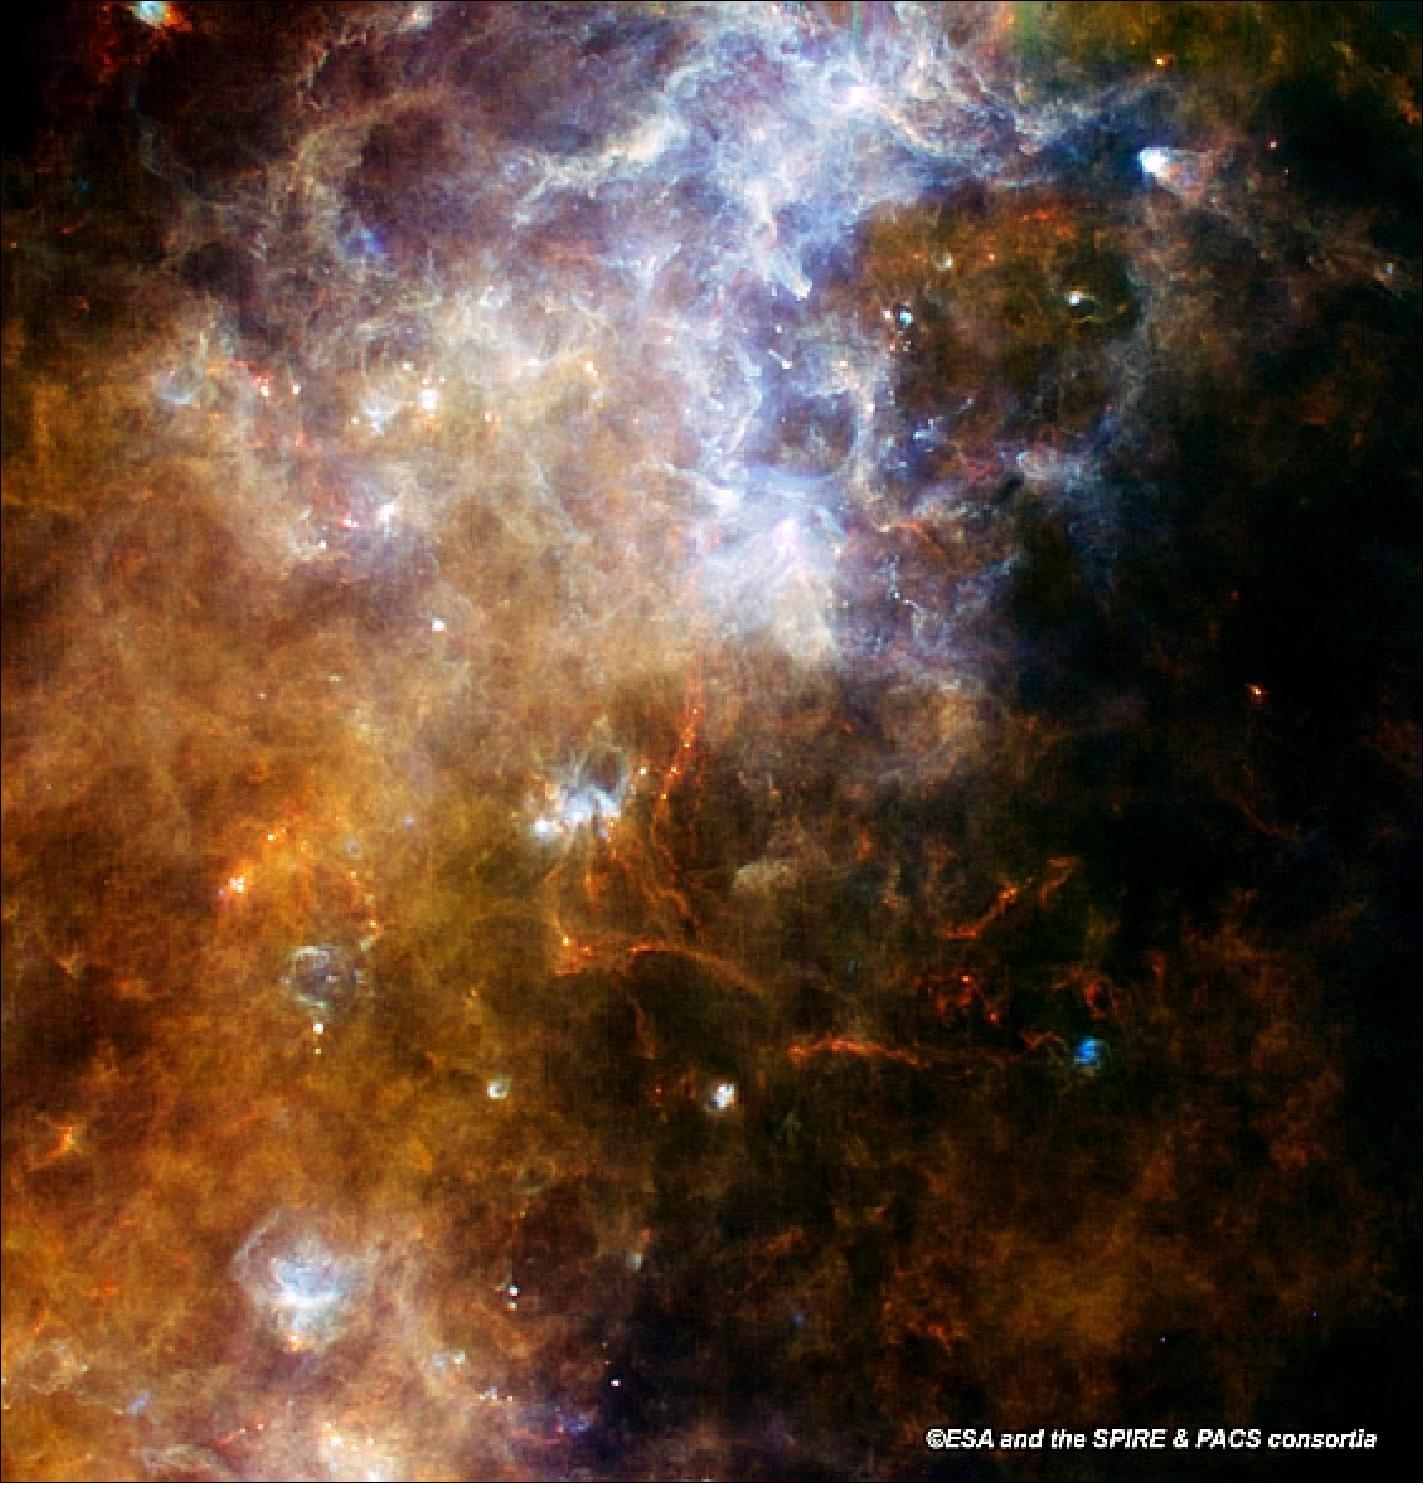 Figure 82: SPIRE/PACS image of region of the Milky Way near the Galactic Plane (image credit: ESA and the SPIRE & PACS Consortia)